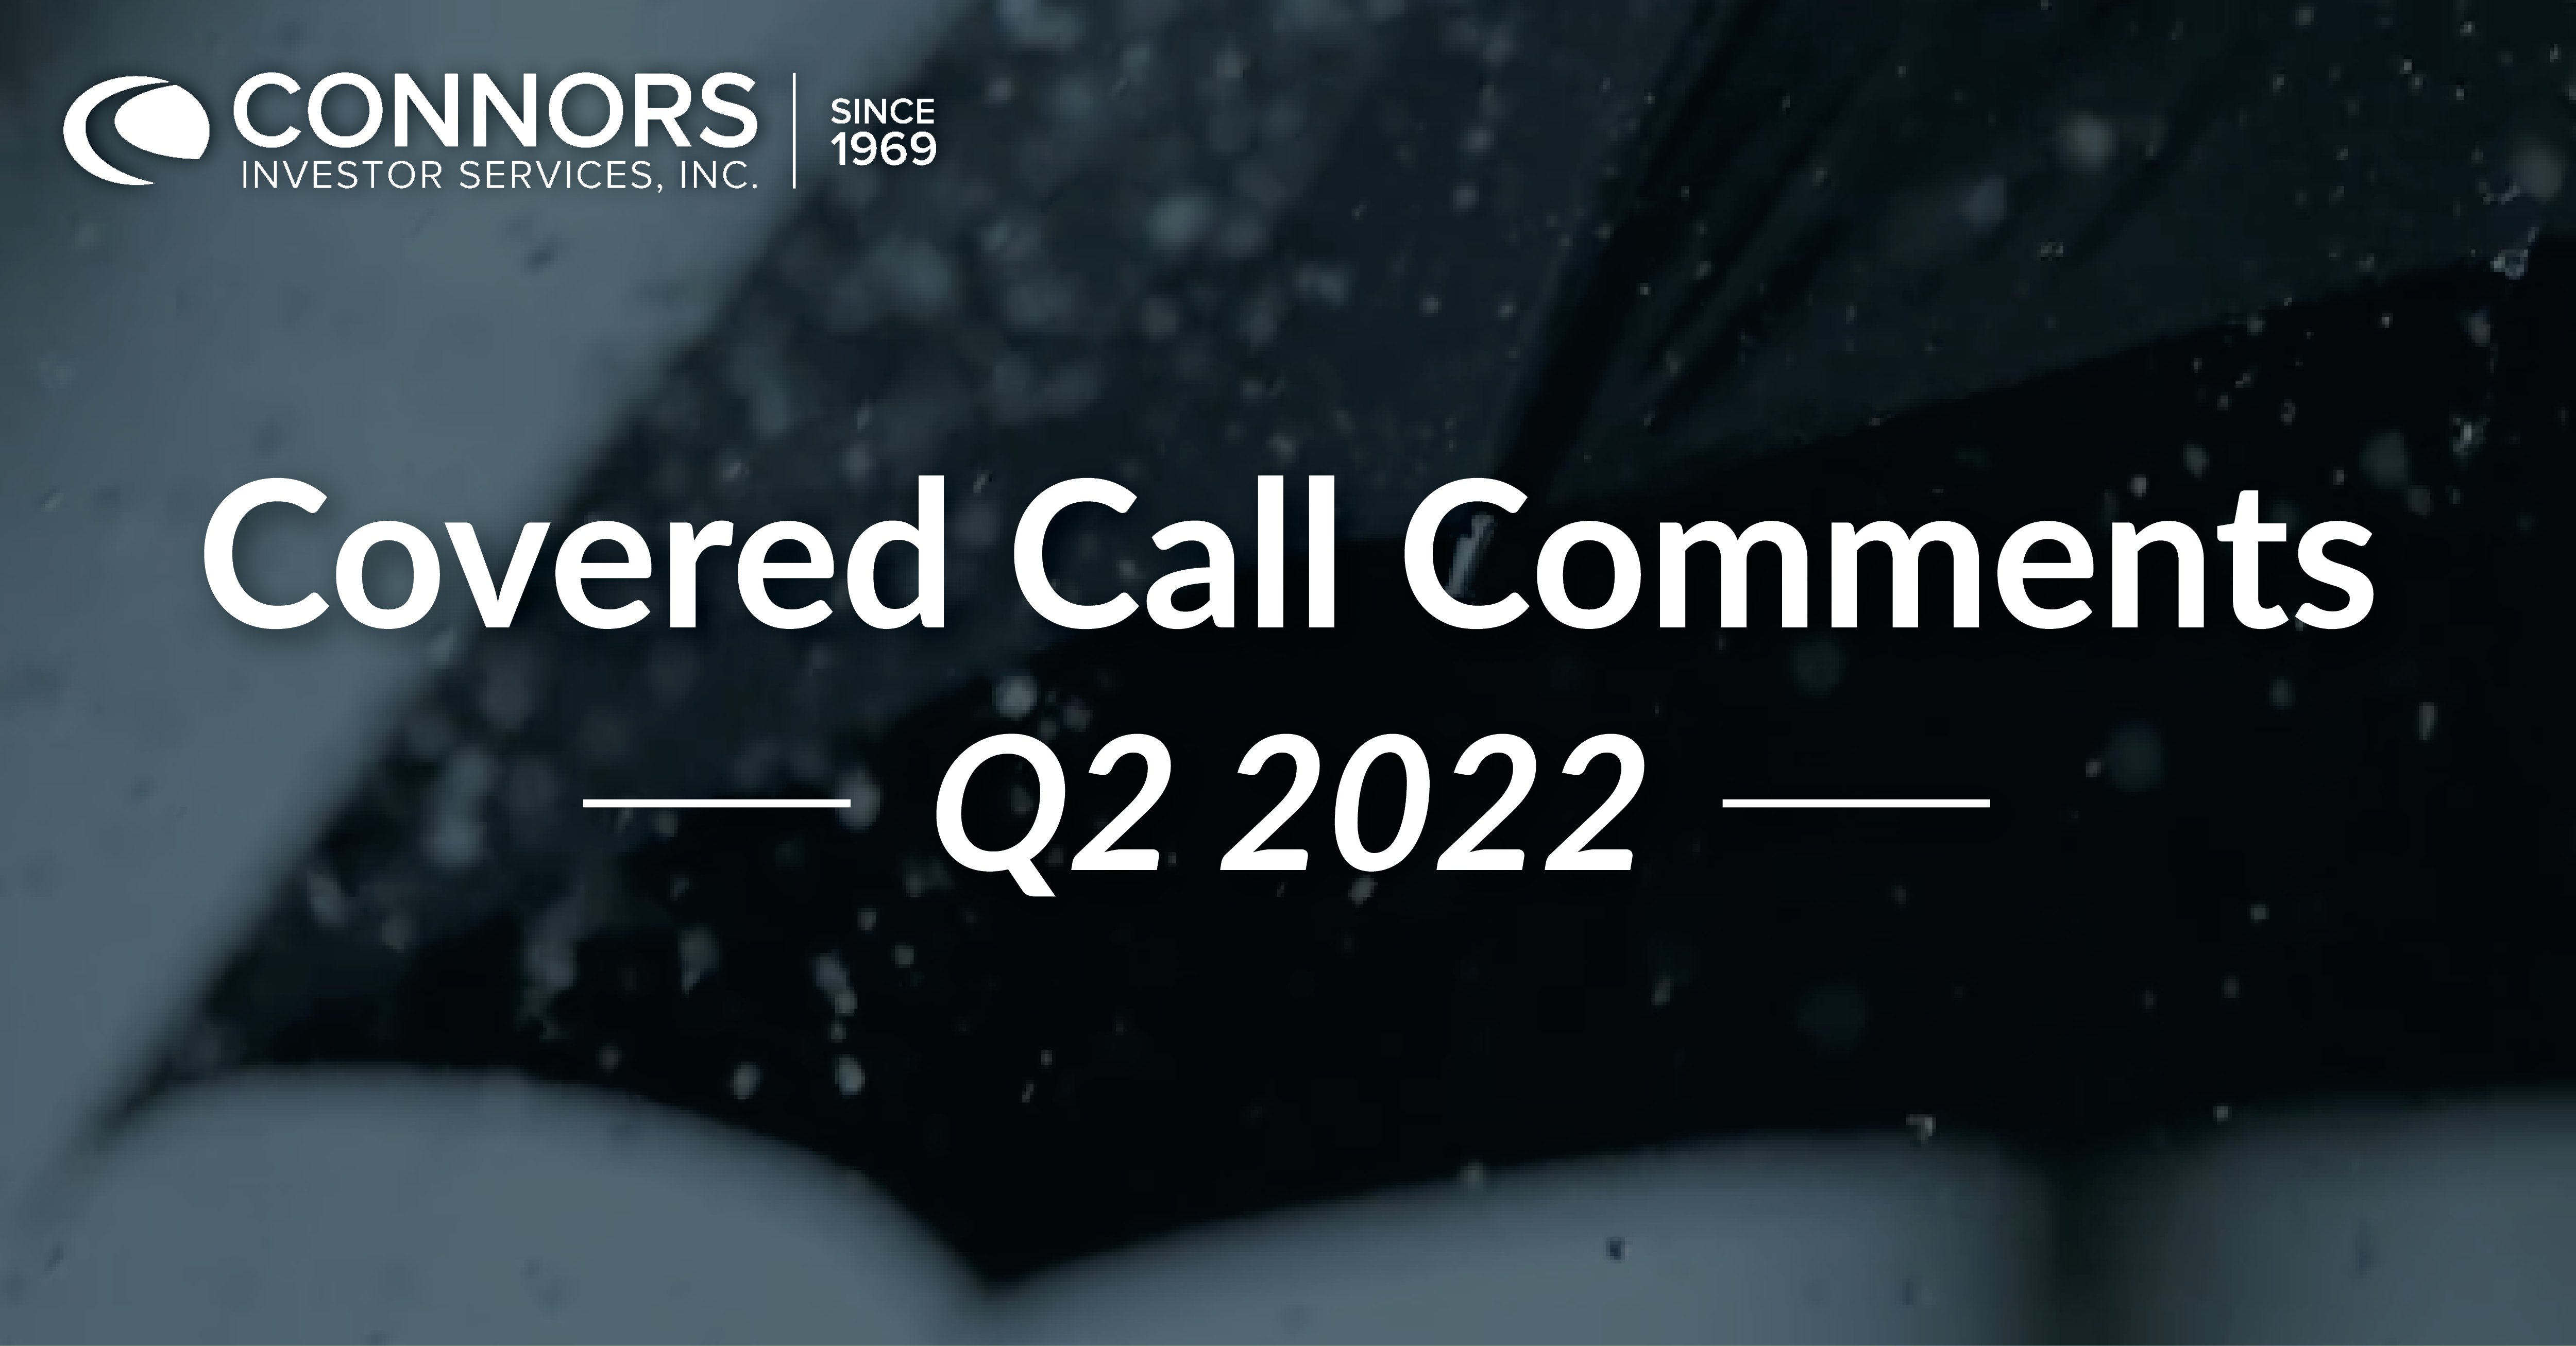 Q2 2022 Covered Call Comments